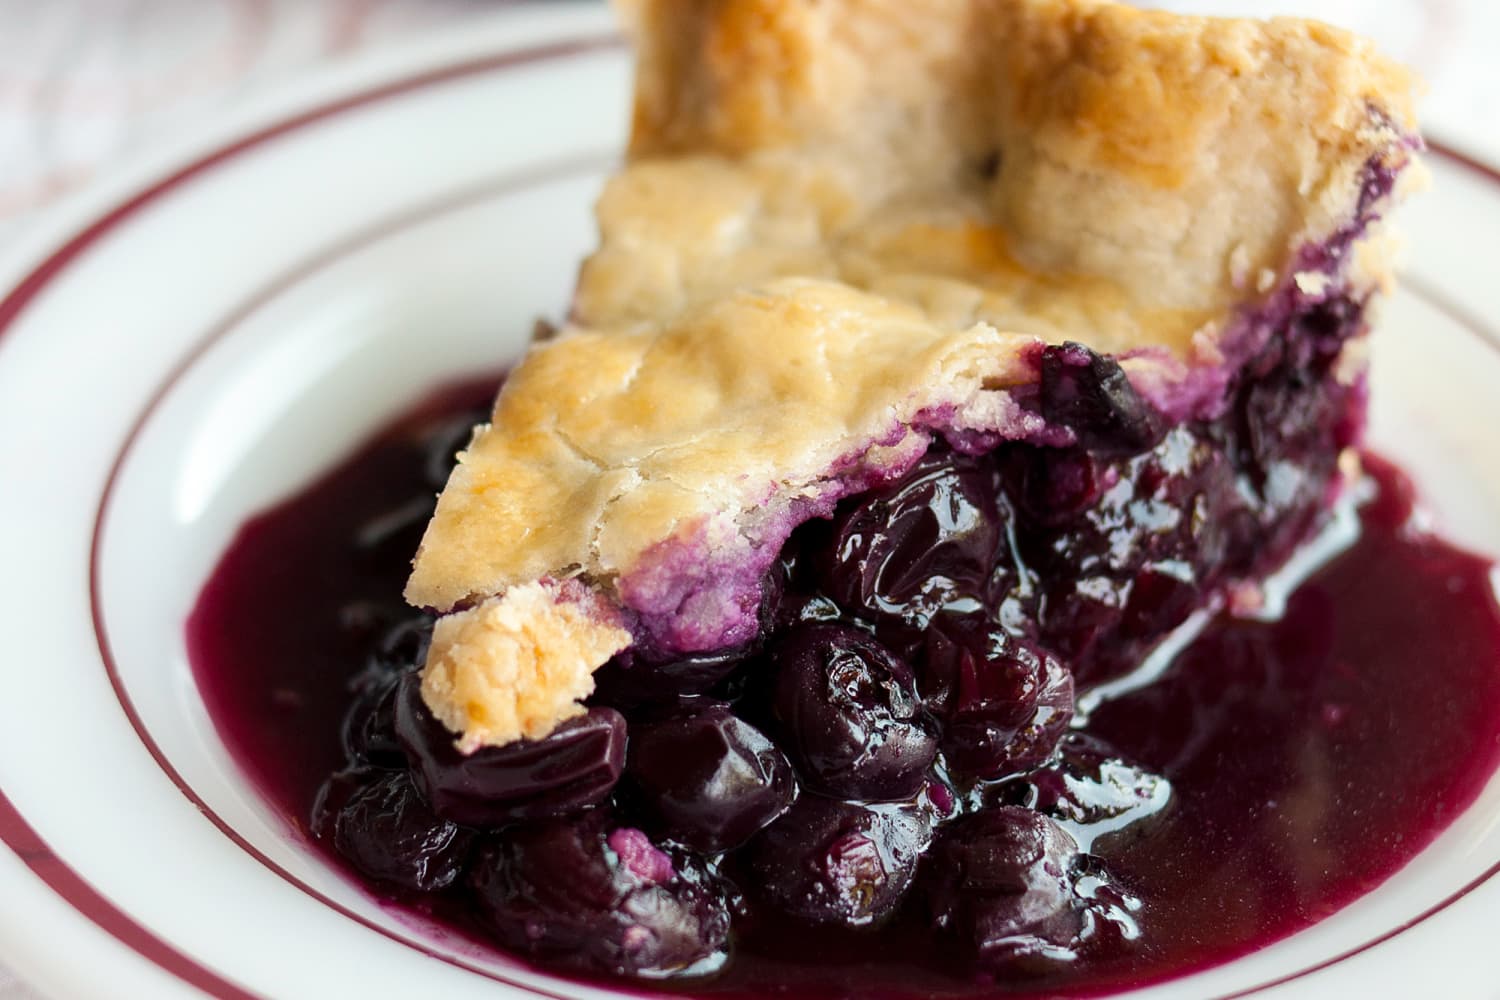 Blueberry Pie Recipe (Easy, with Fresh Blueberries)